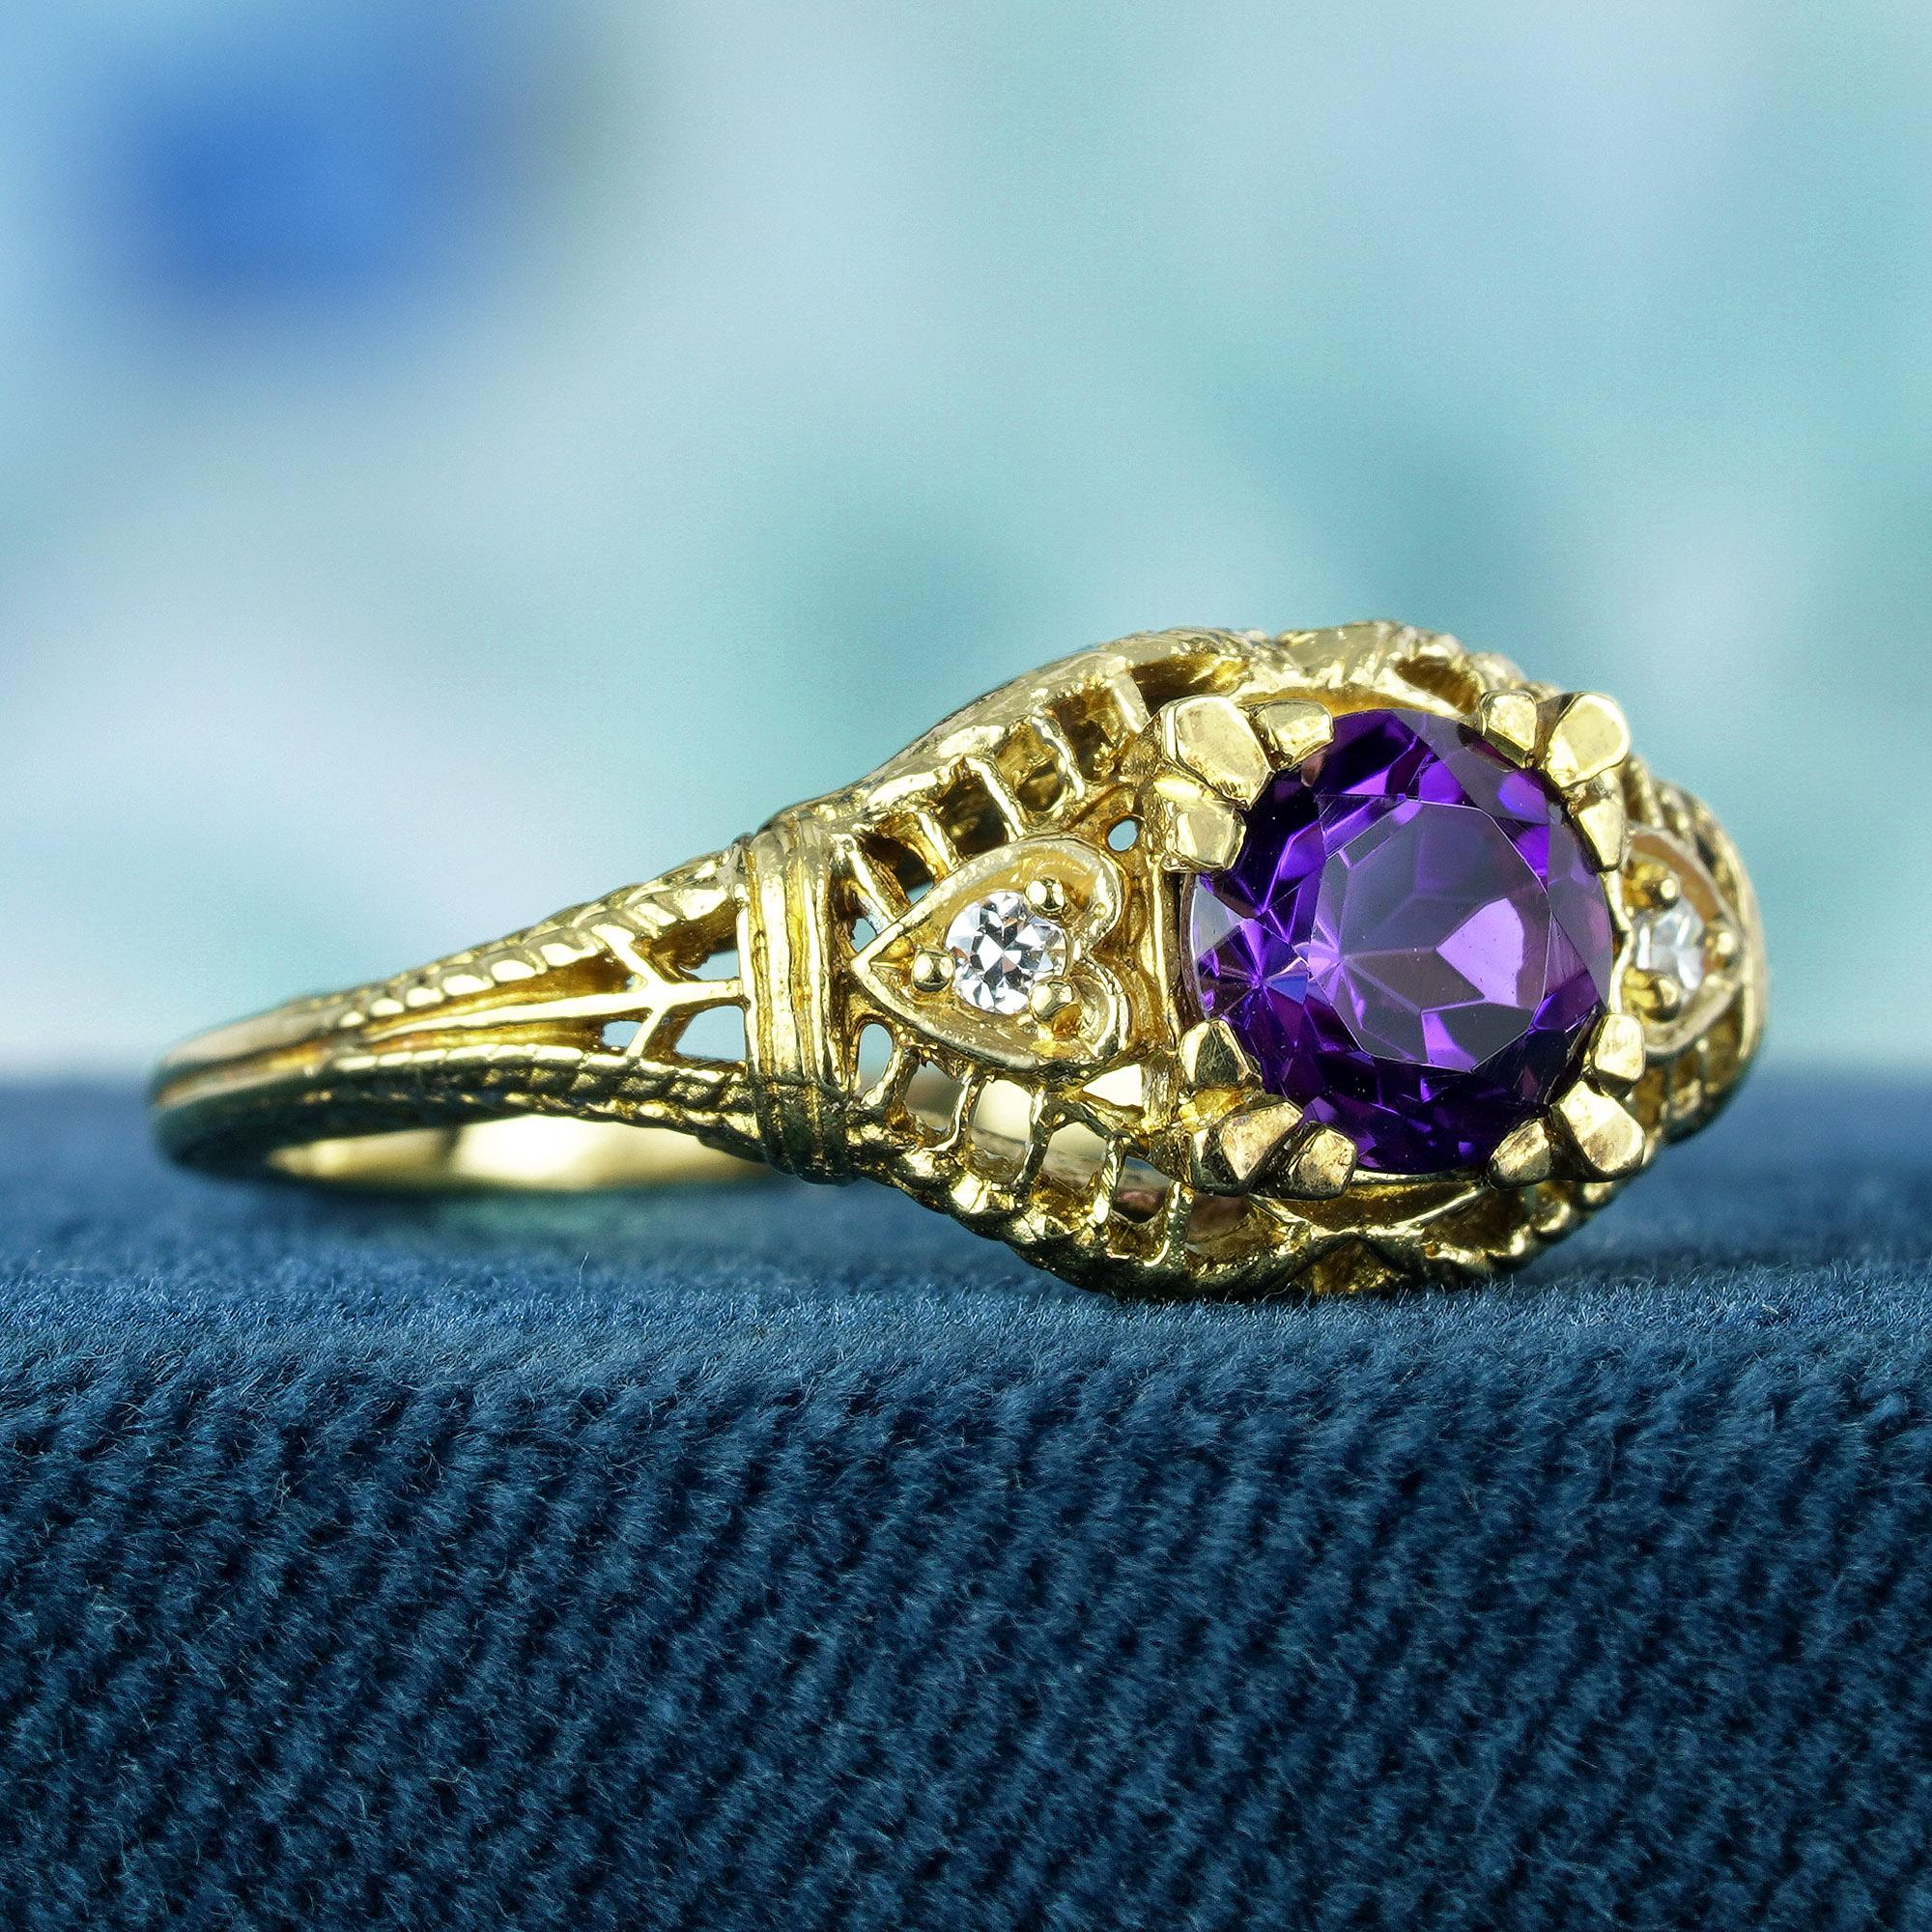 Expertly crafted from delicate filigree yellow gold, this captivating vintage design encircles the round purple Amethyst at its center with timeless elegance. Intricate openwork detailing enhances the ring, infusing it with a touch of vintage